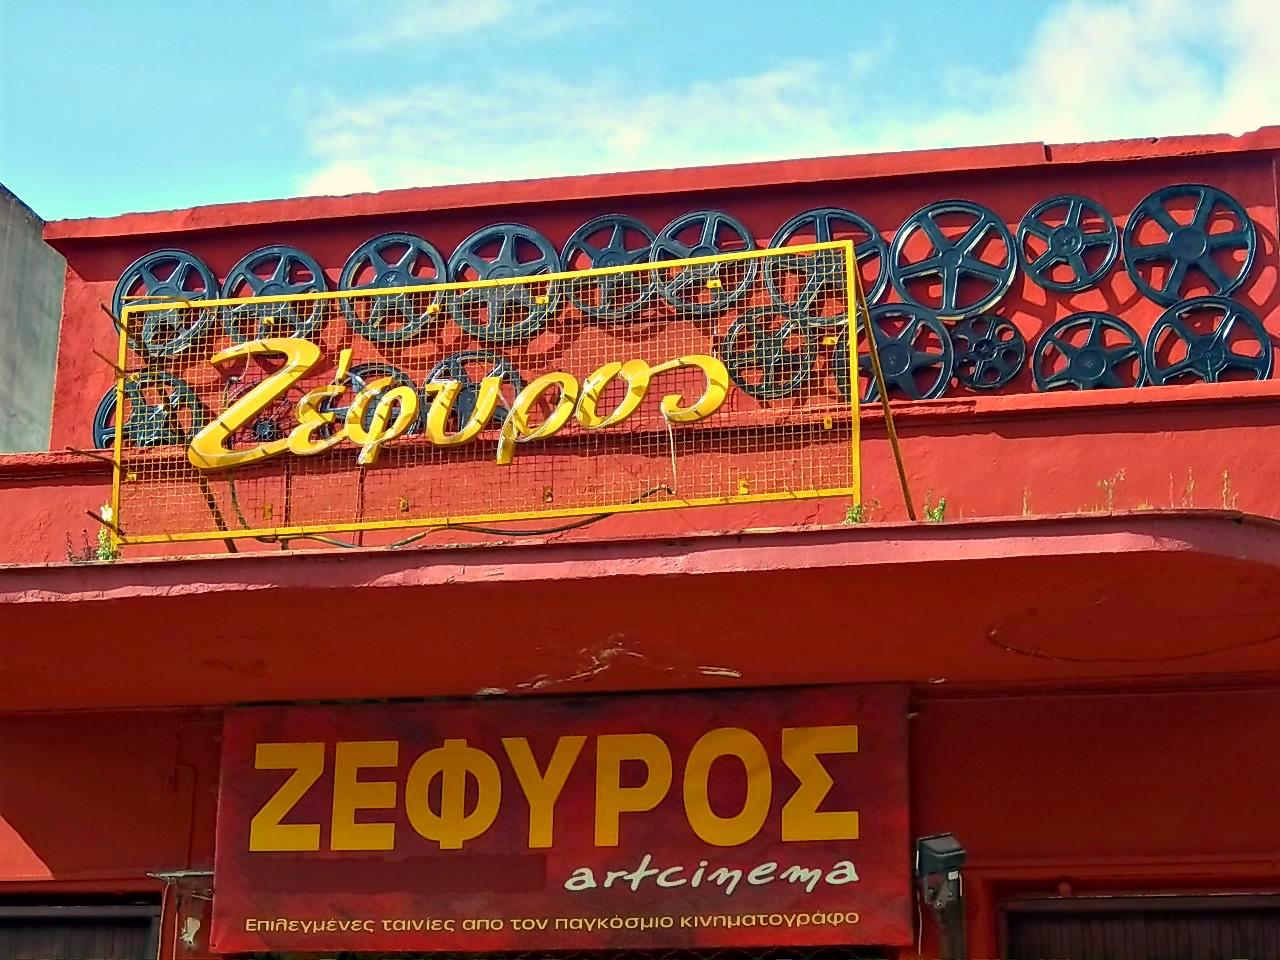 Cover image of this place Zefyros